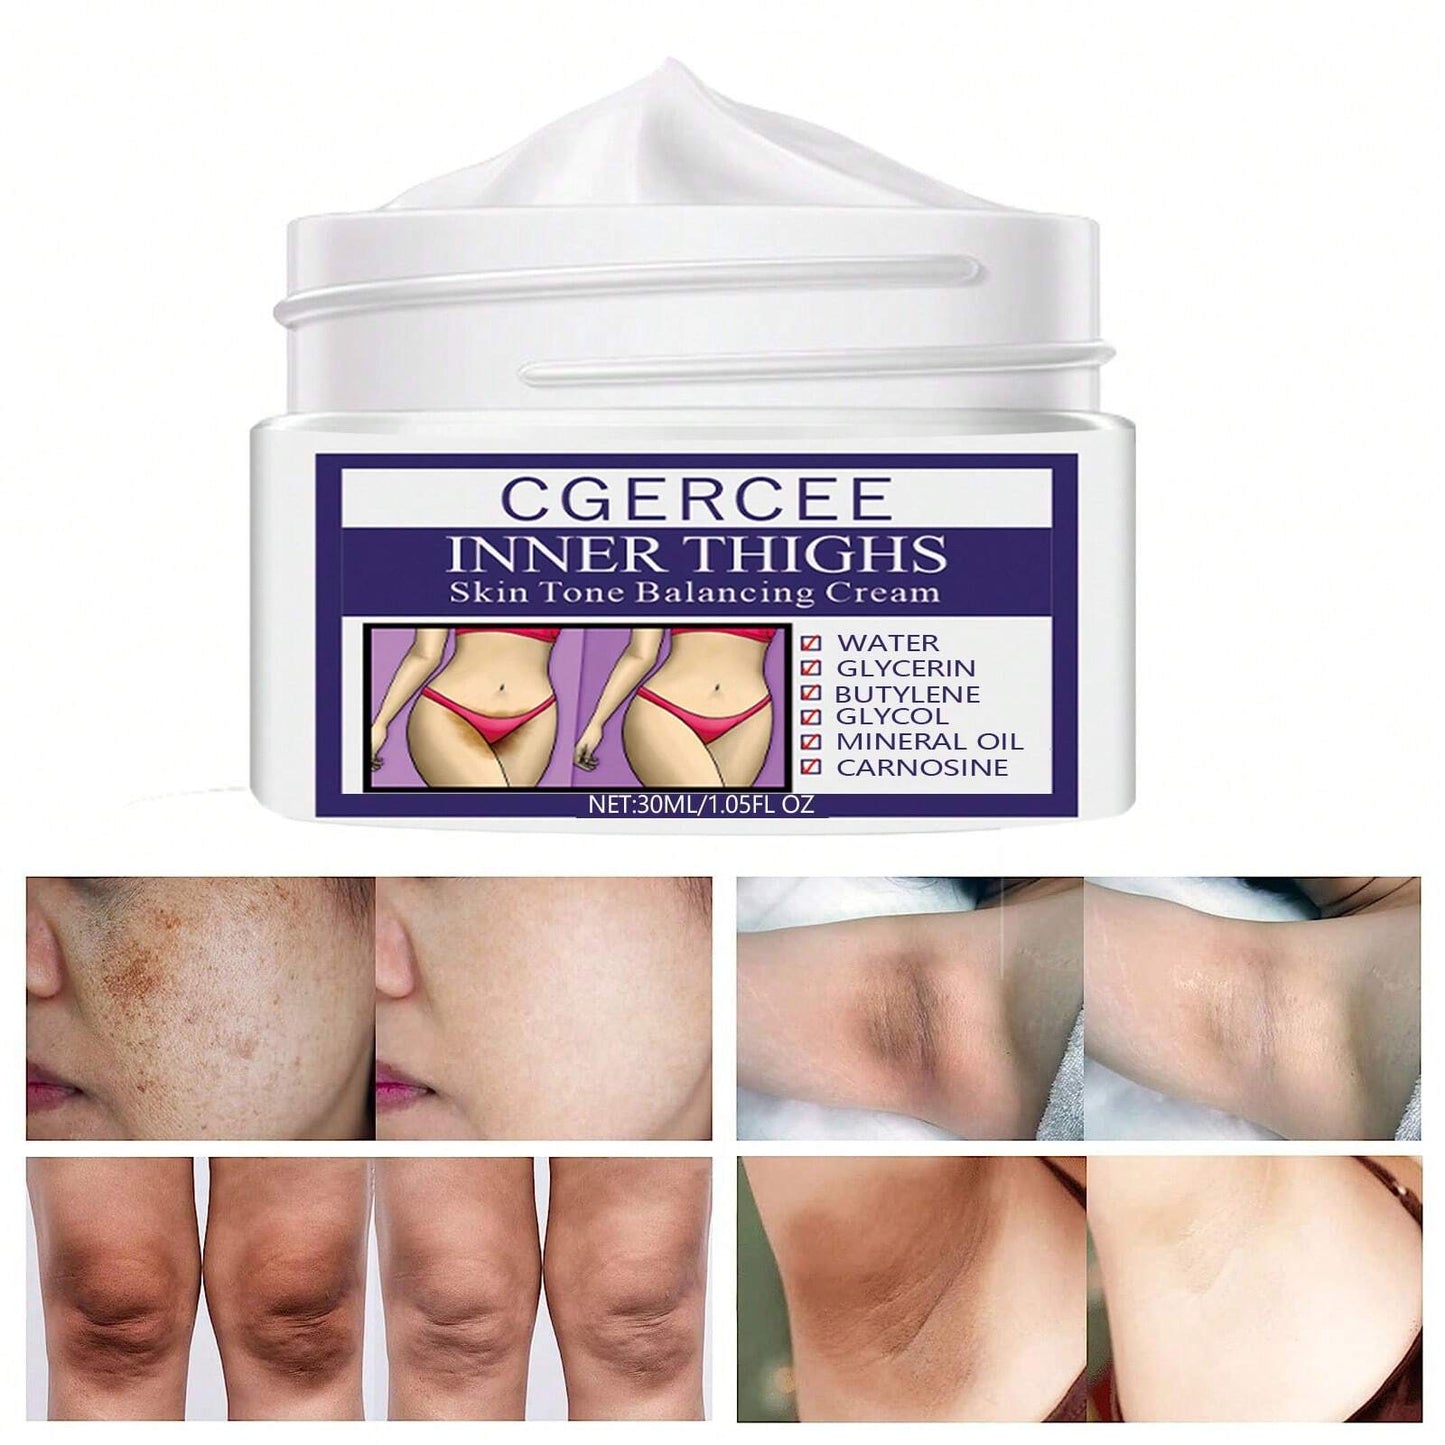 Dark Spot Repair Cream - 30ml: Enhances Skin Tone and Texture for Face, Neck, Armpit, Hand, Foot, and Joints.